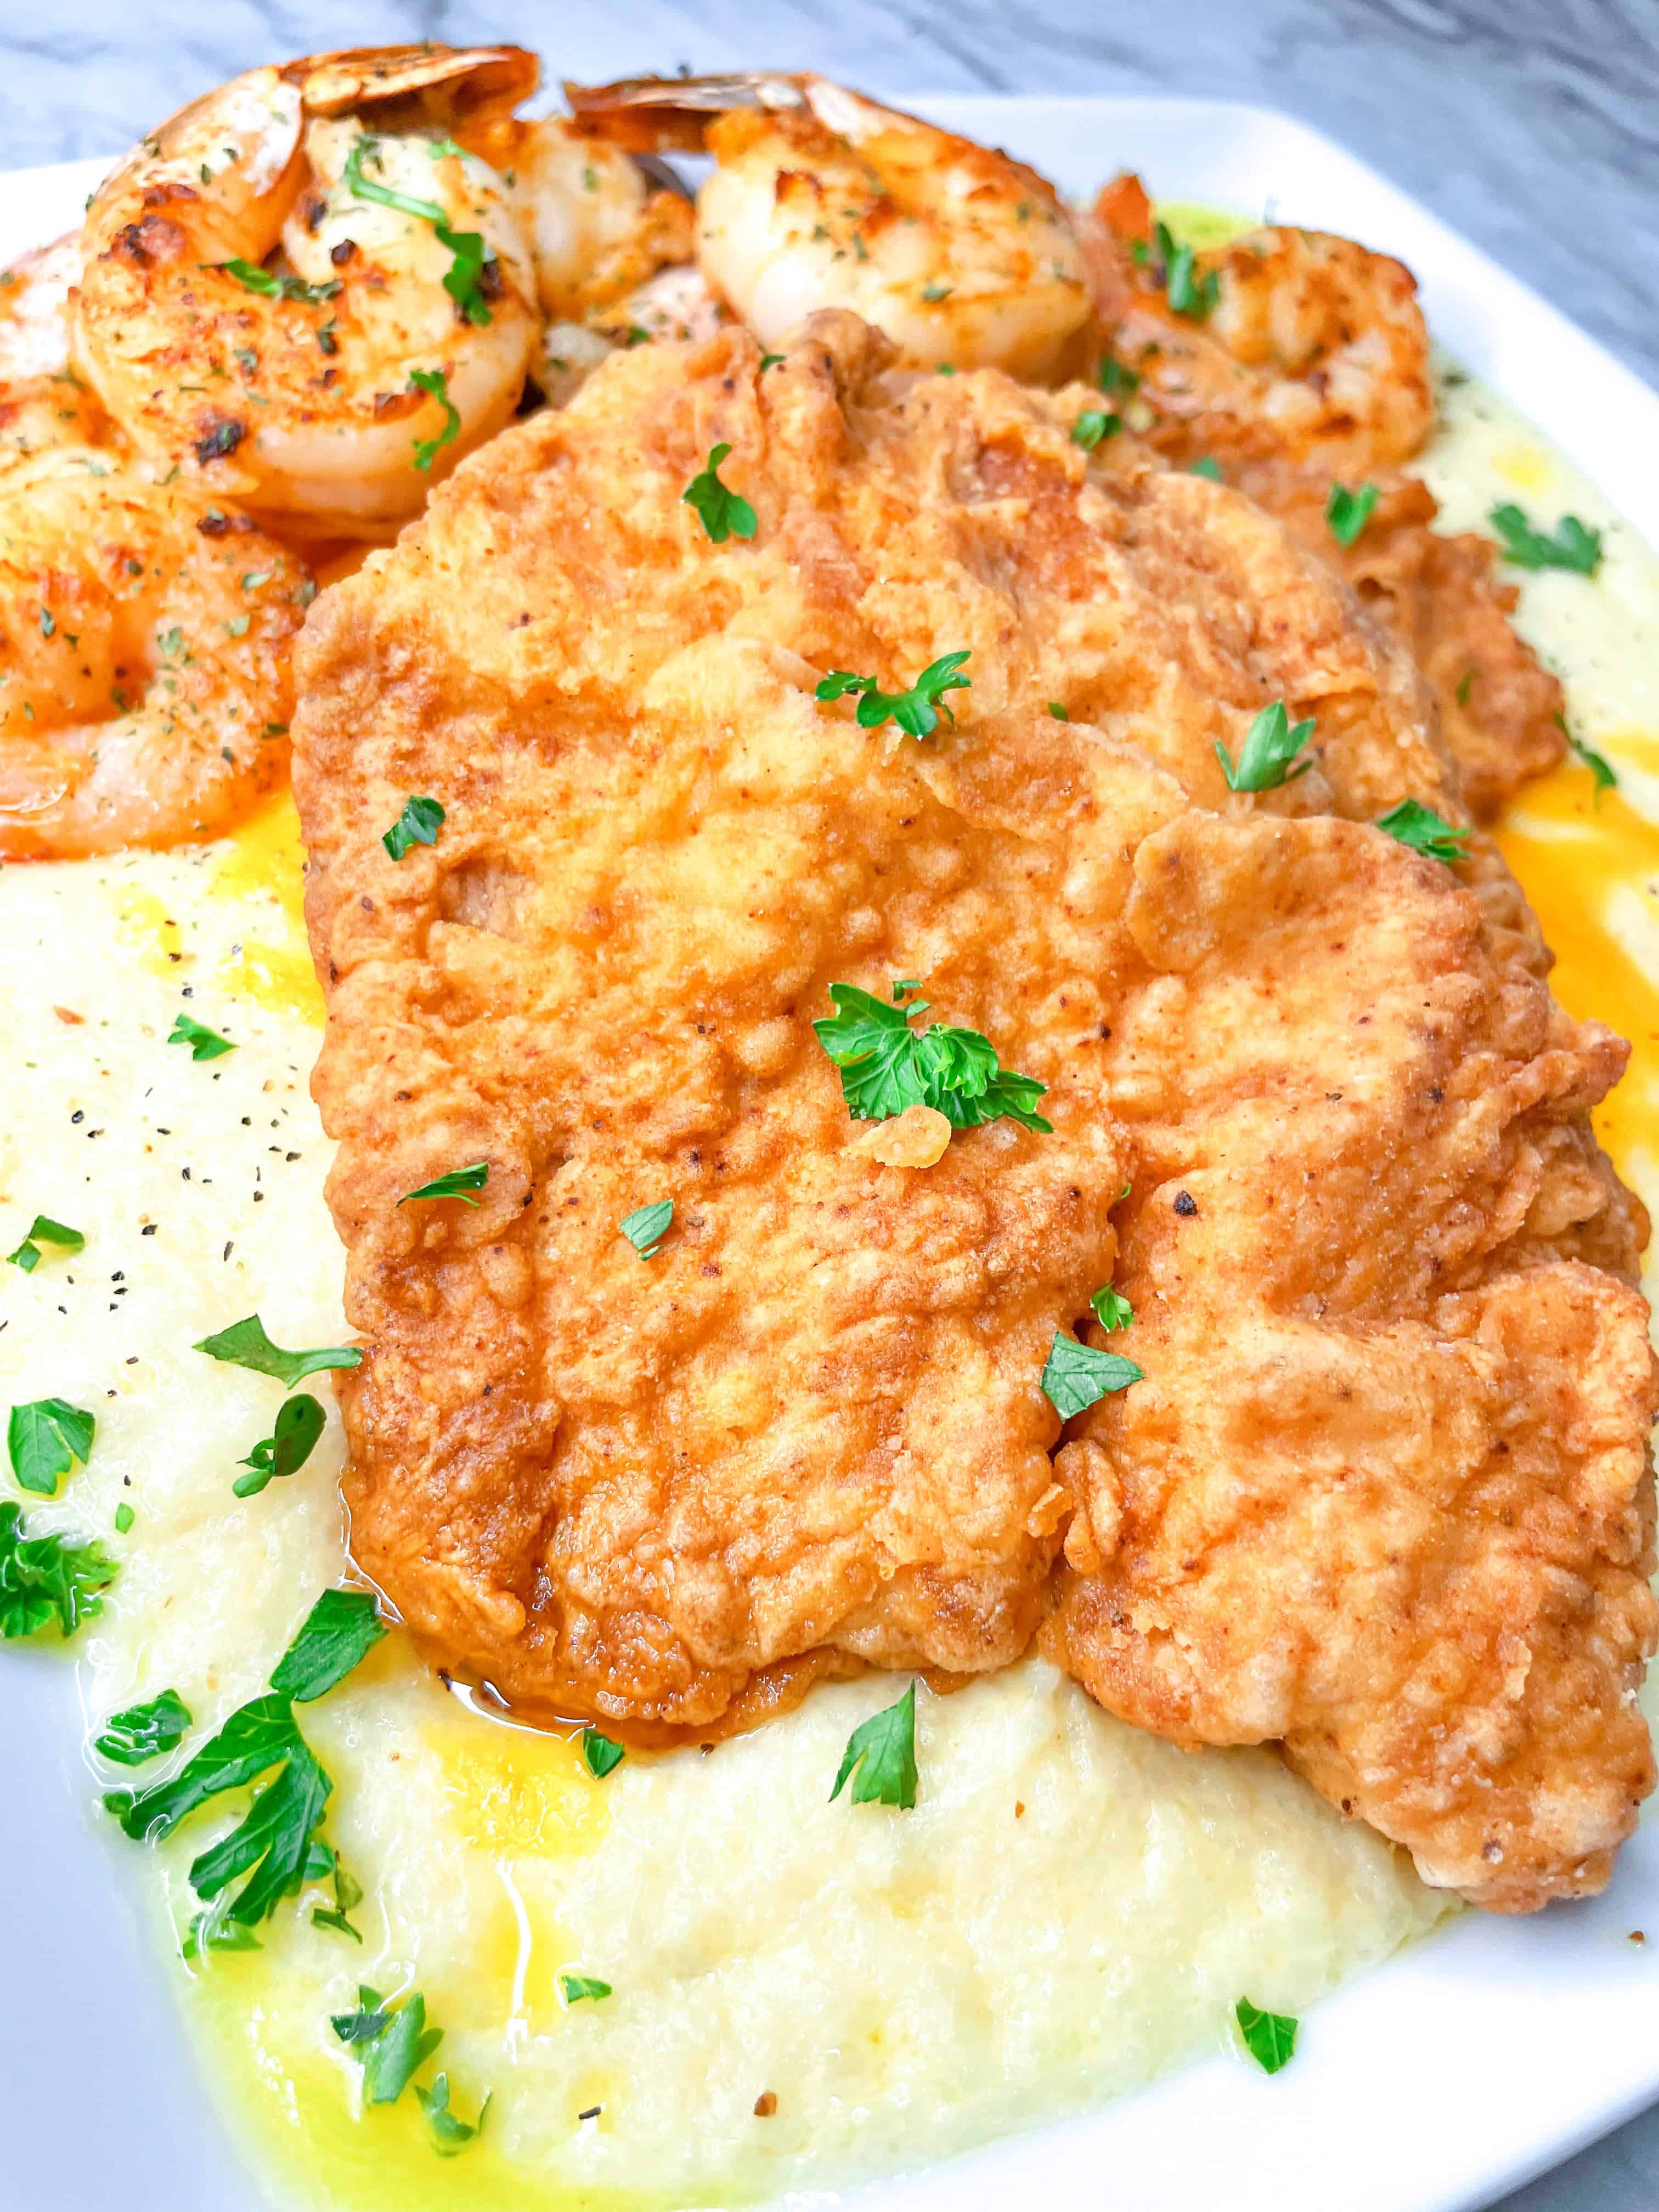 Fried Tilpia with Shrimp and Grits